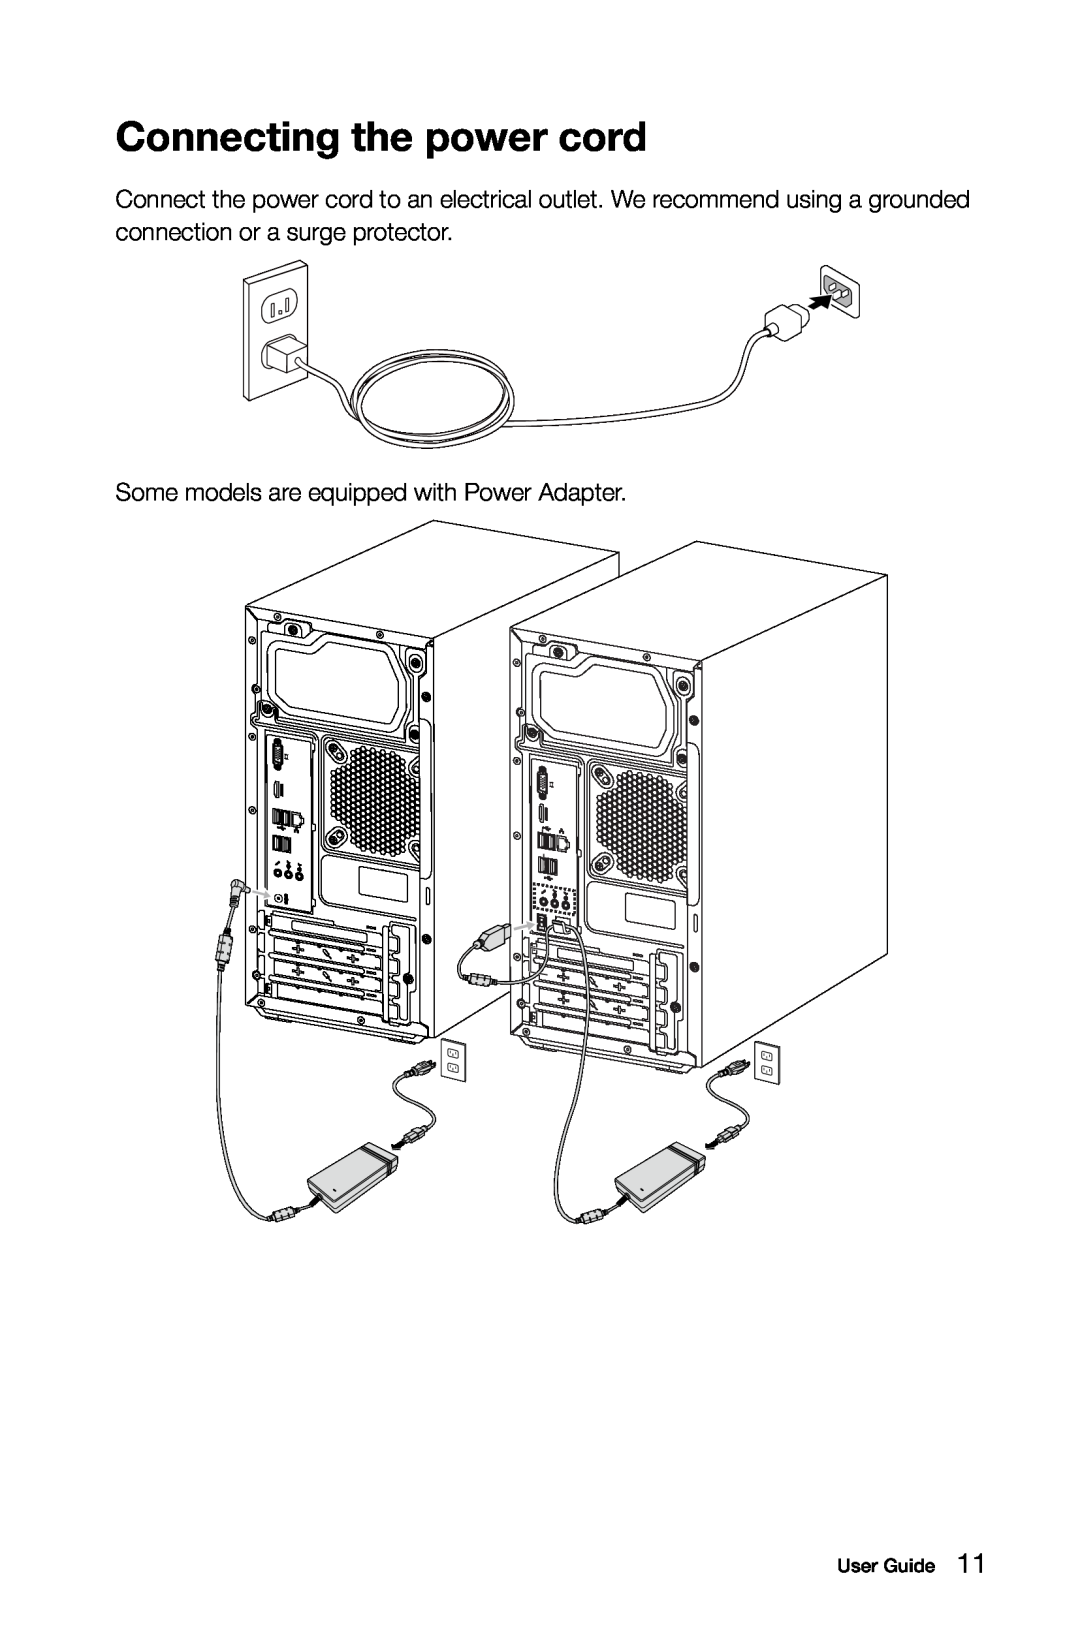 Lenovo 57321302 manual Connecting the power cord, Some models are equipped with Power Adapter, User Guide 